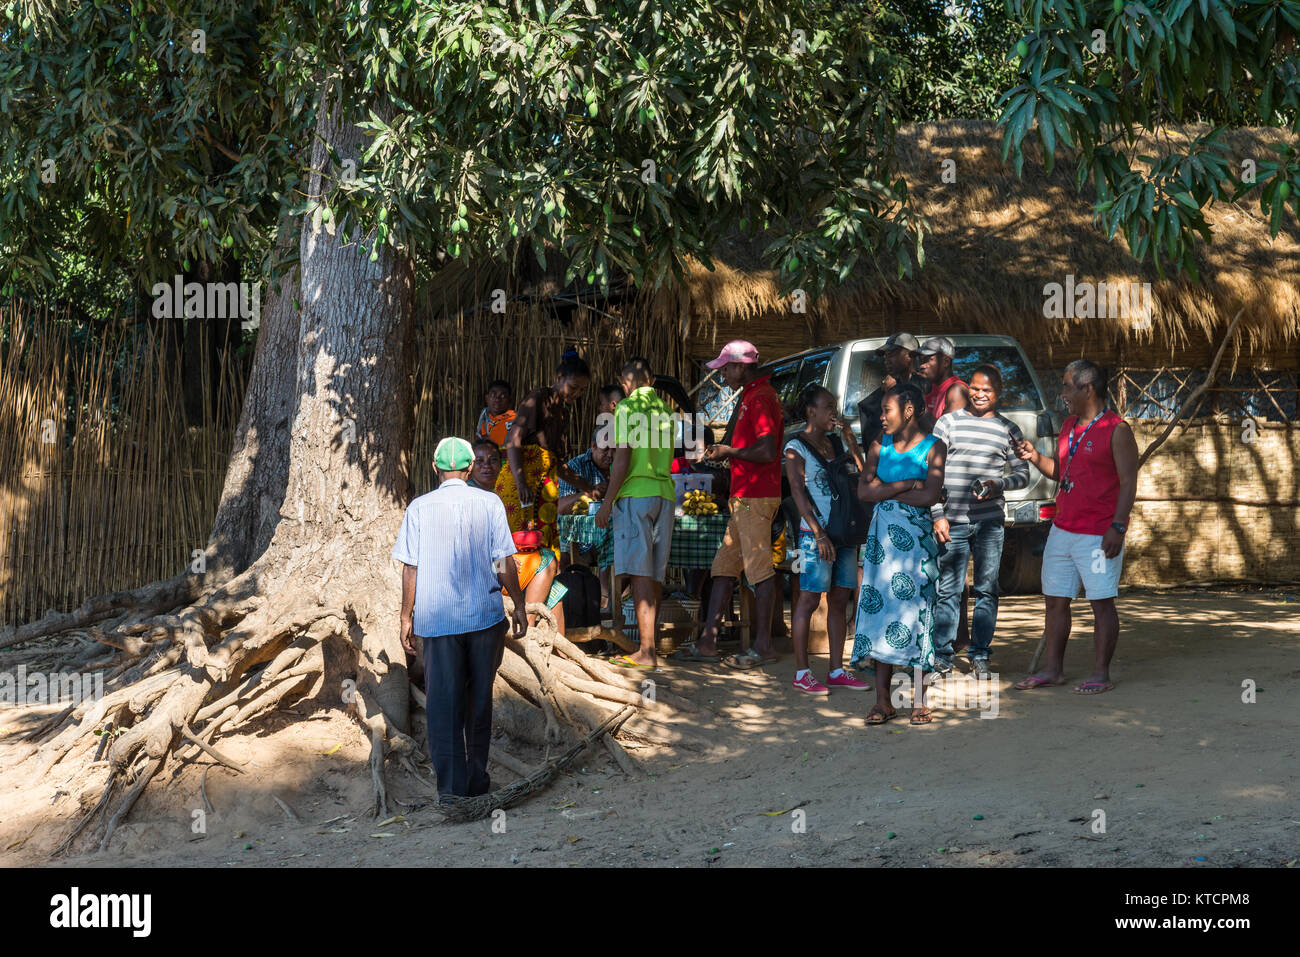 Local Malagasy people gathering under a tree in a village. Madagascar, Africa. Stock Photo